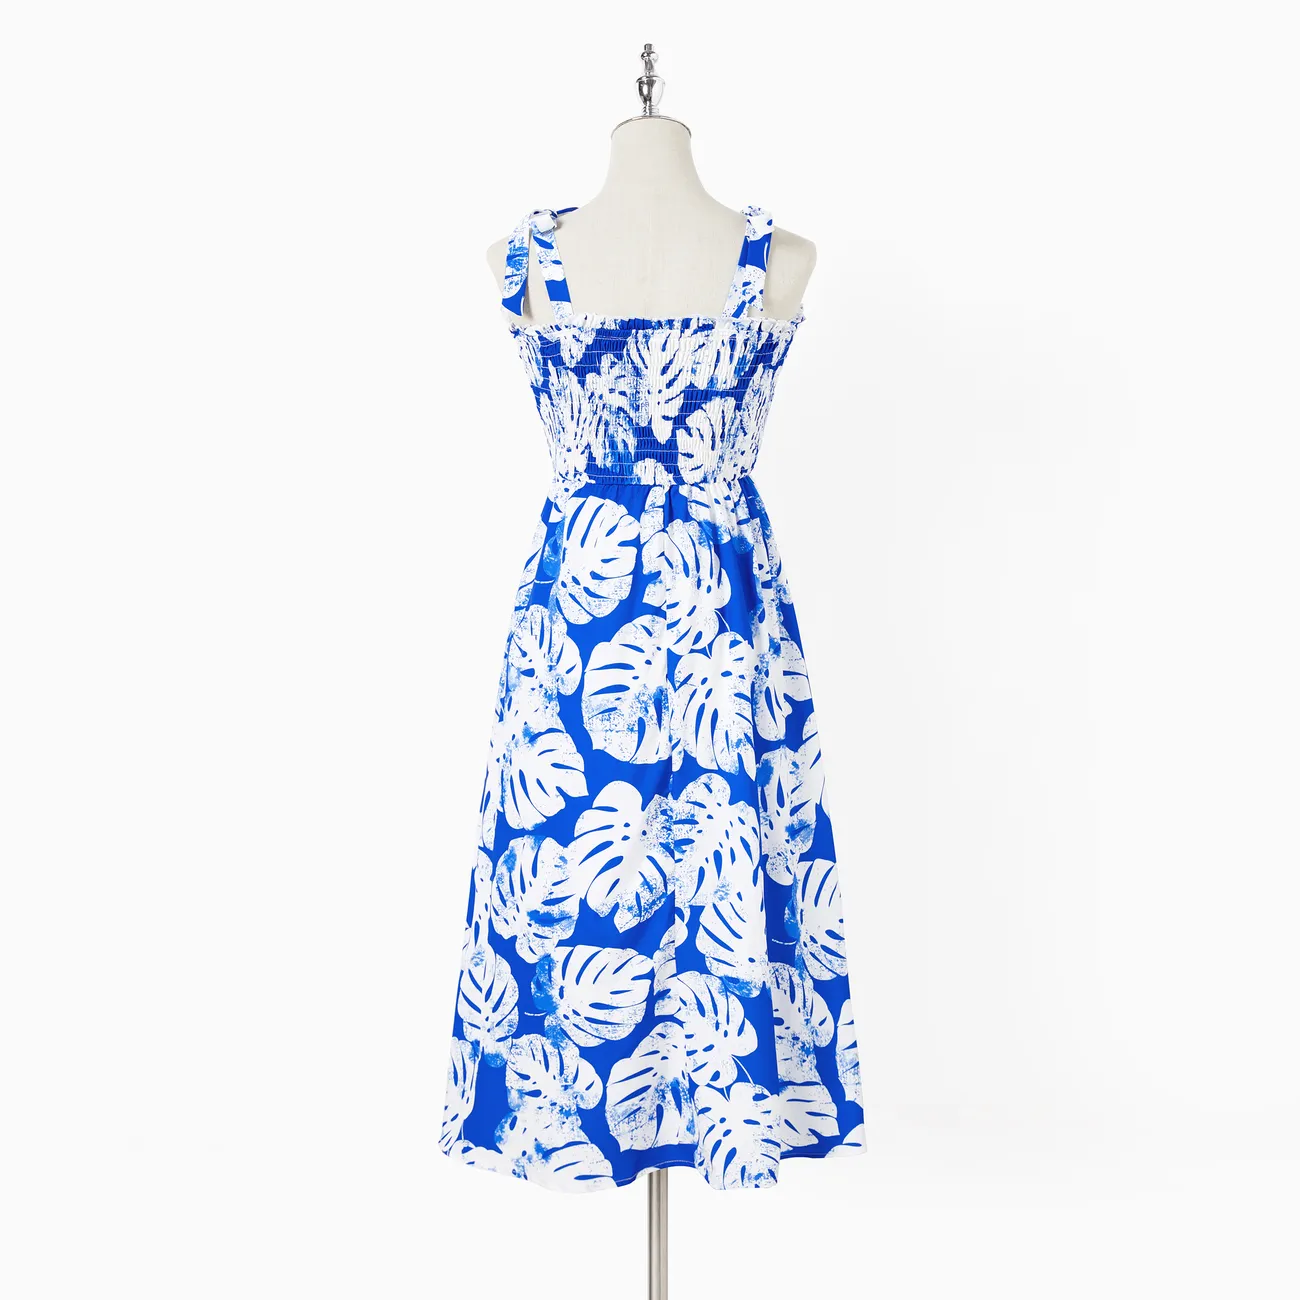 Family Matching Color Block Tee and Blue Leaf Pattern Shirred Top Strap Dress Sets Blue big image 1